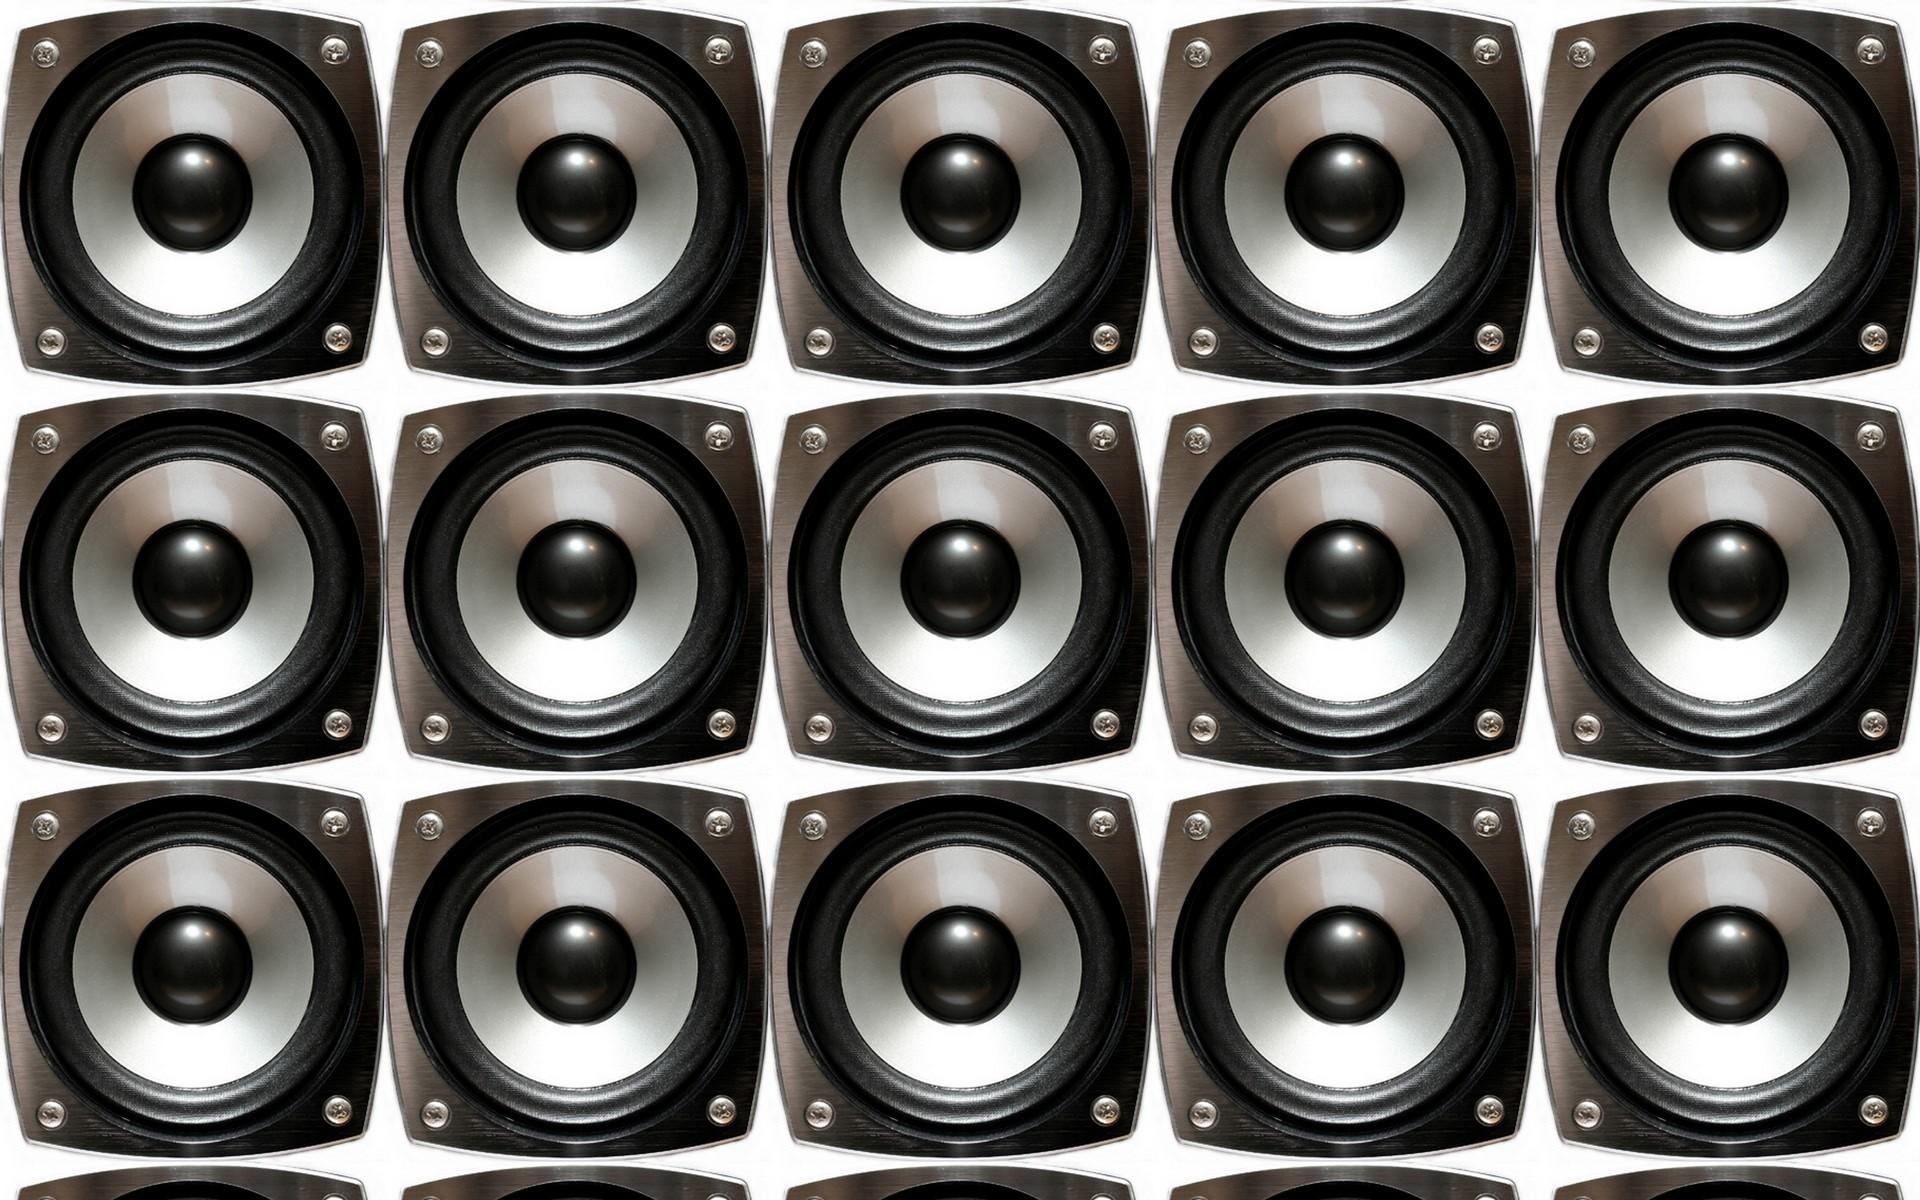 Top Rated Super High Quality Speaker Image